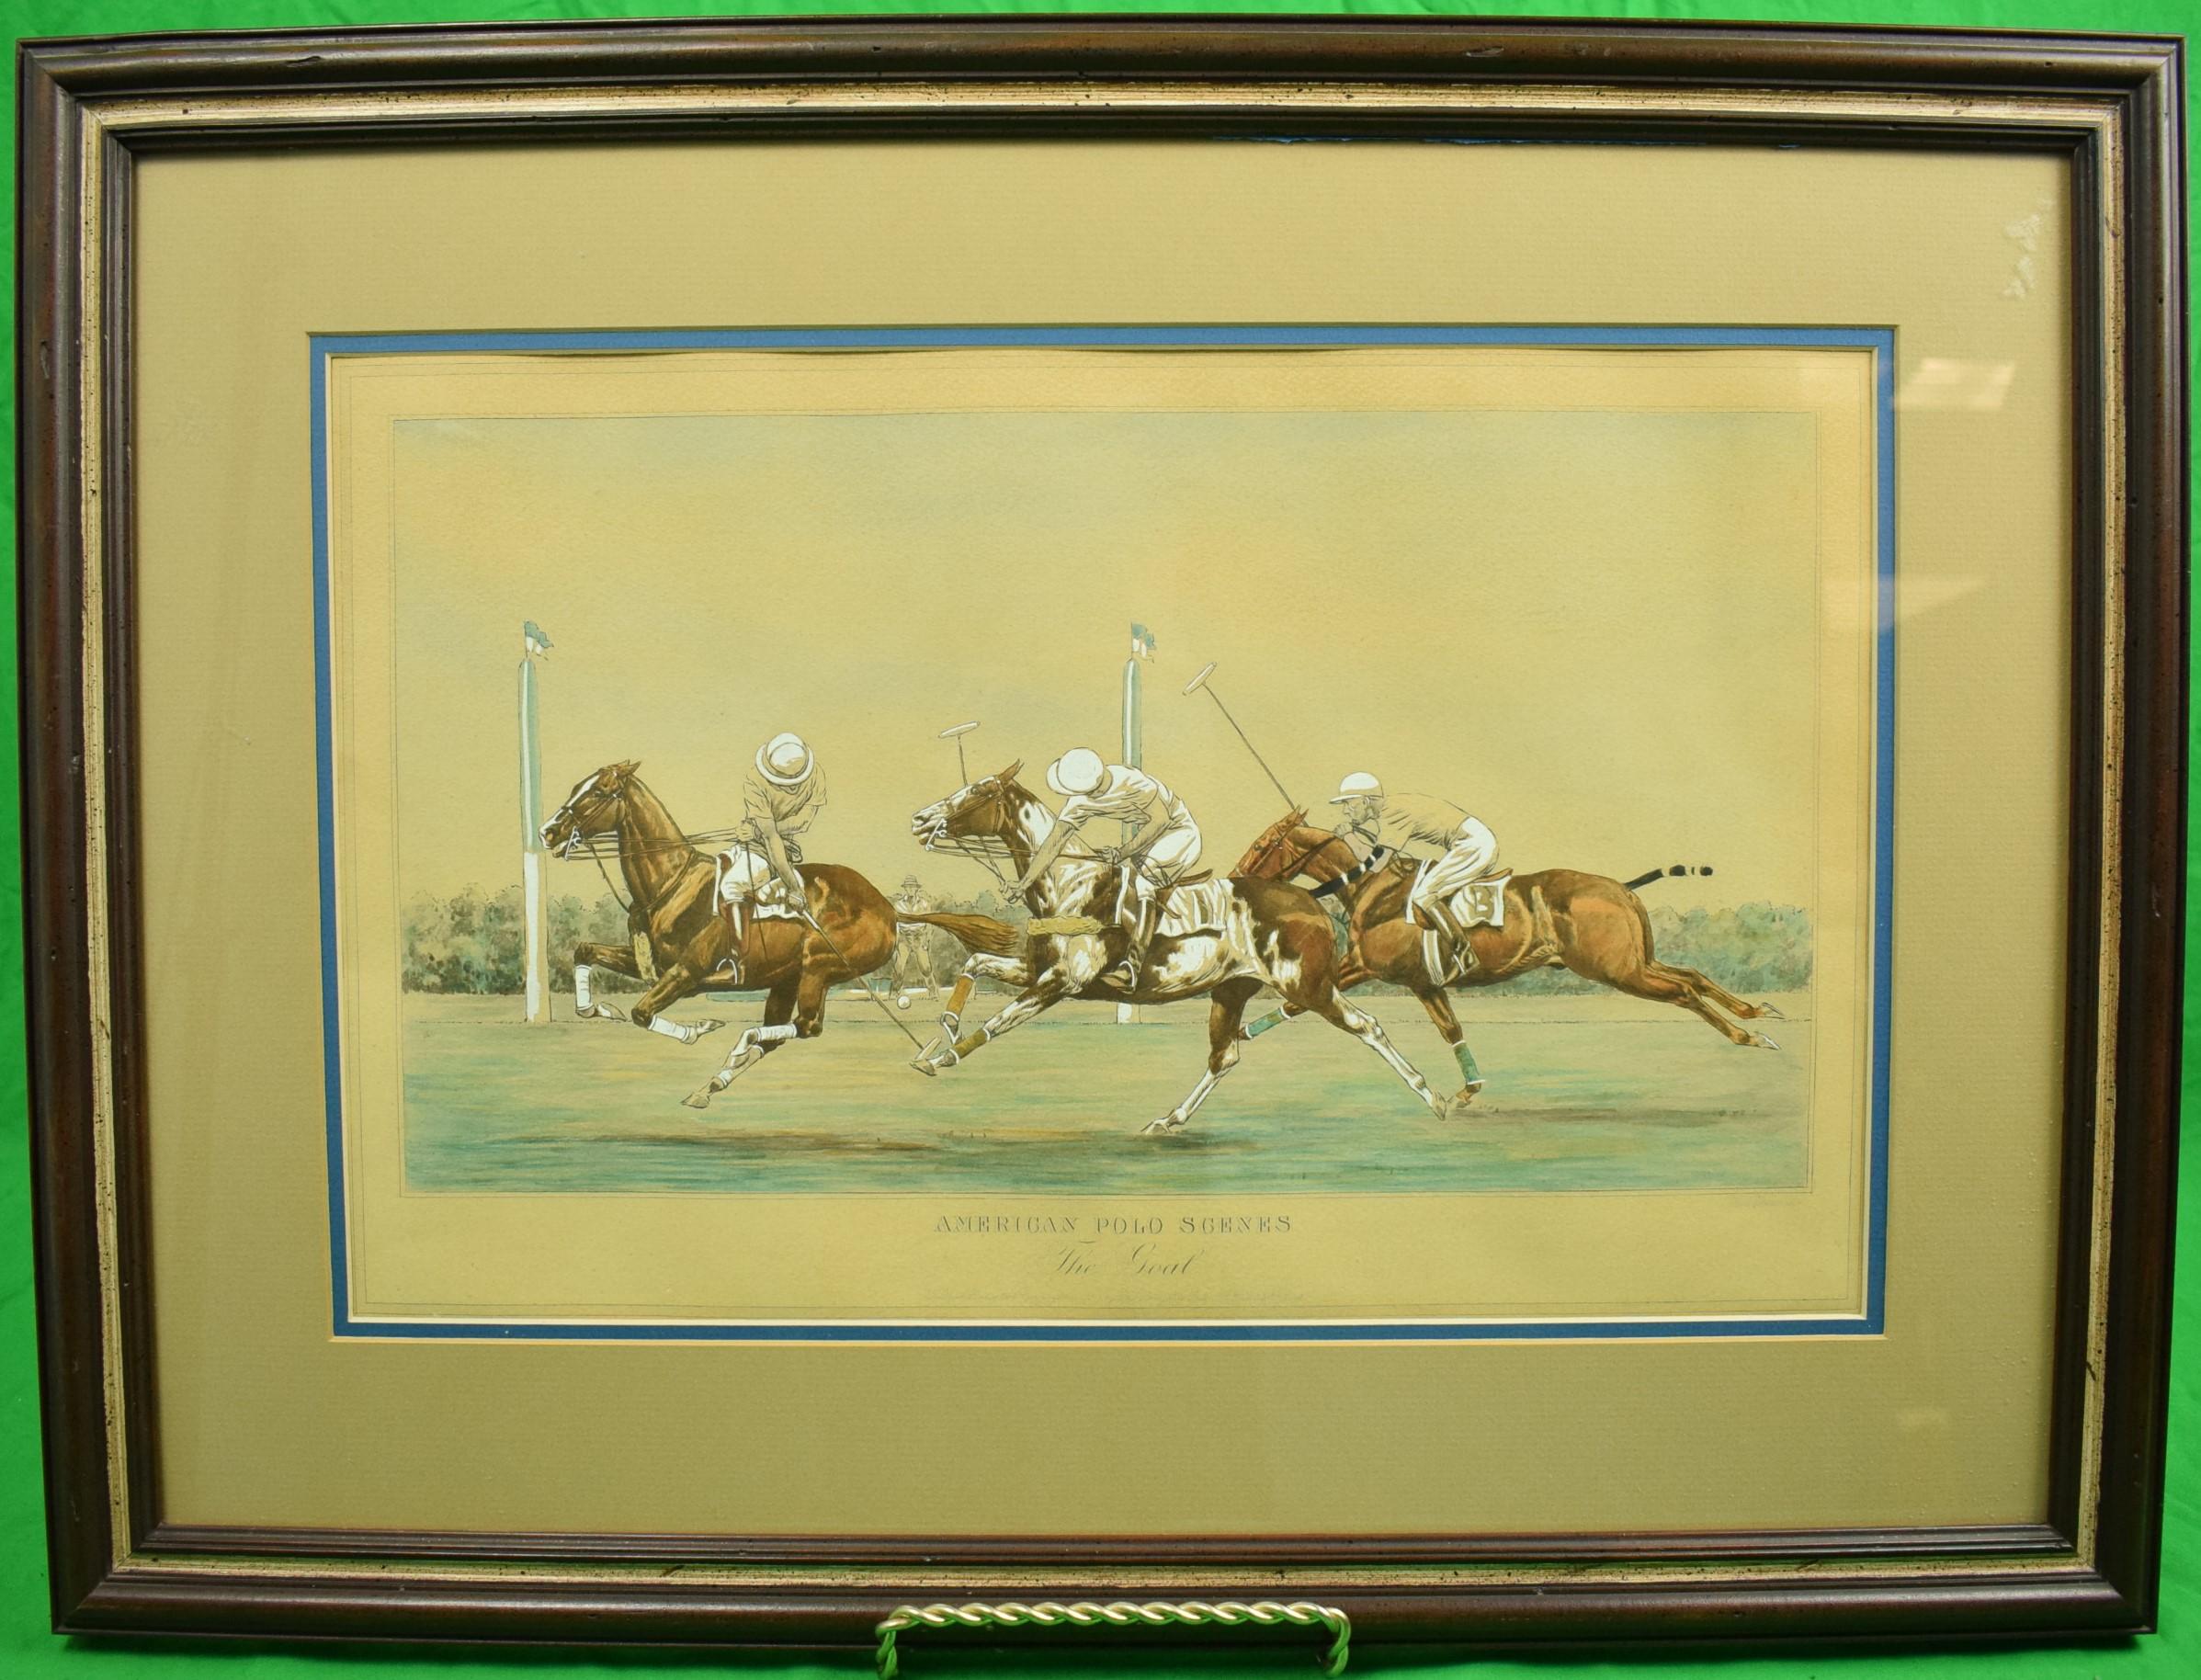 "The Goal" American Polo Scenes 1930 by Paul Brown for The Derrydale Press - Print by Paul Desmond Brown